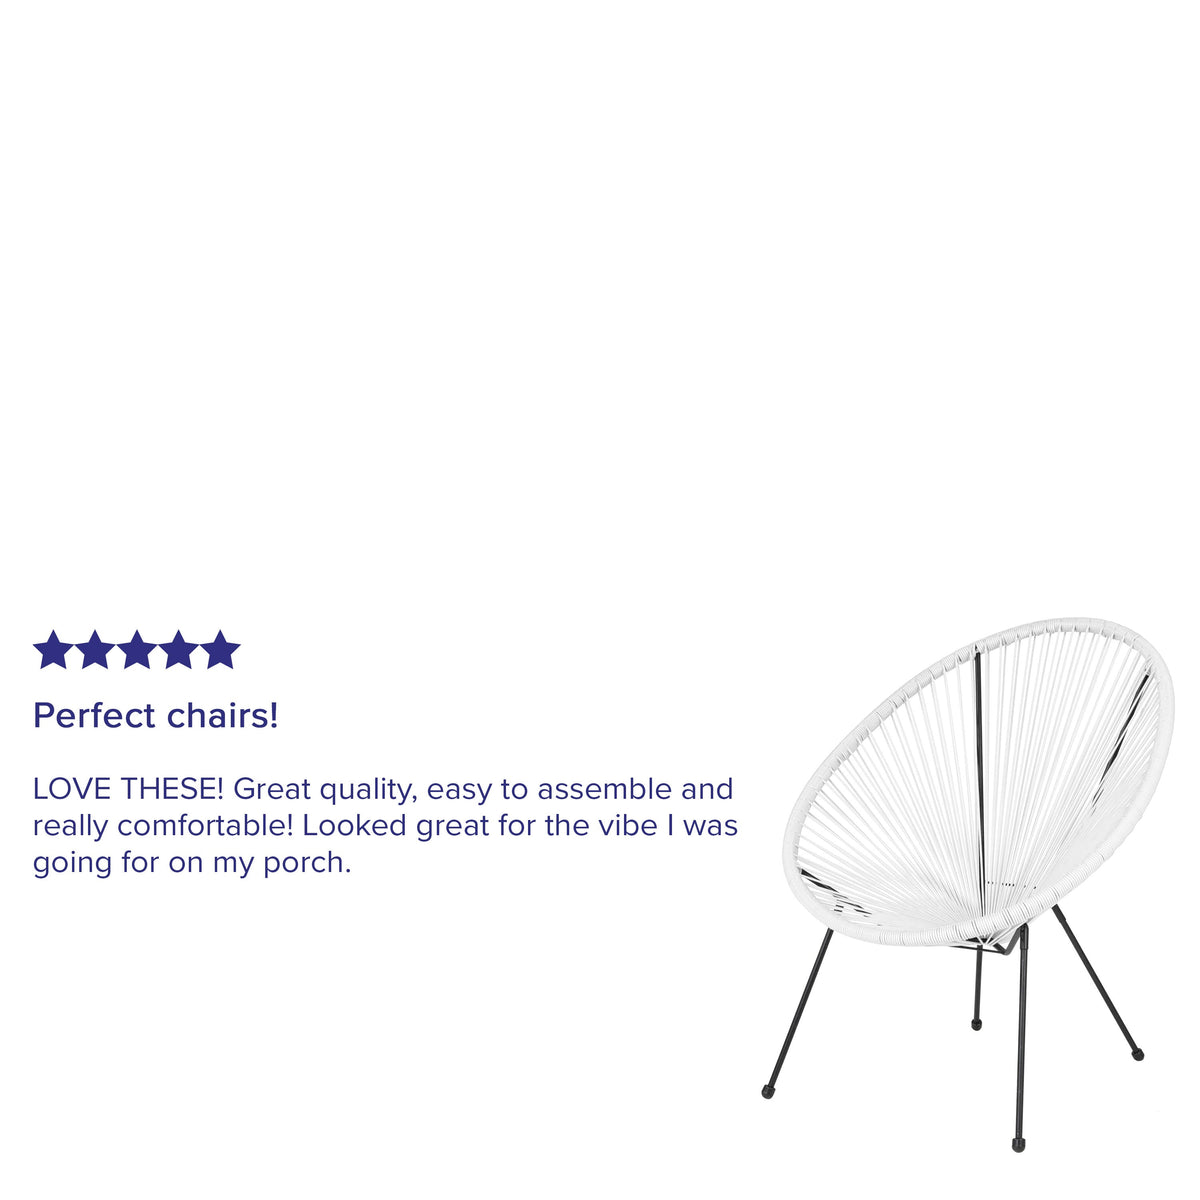 White |#| White Papasan Oval Woven Basket Bungee Lounge Chair - Indoor/Outdoor Furniture